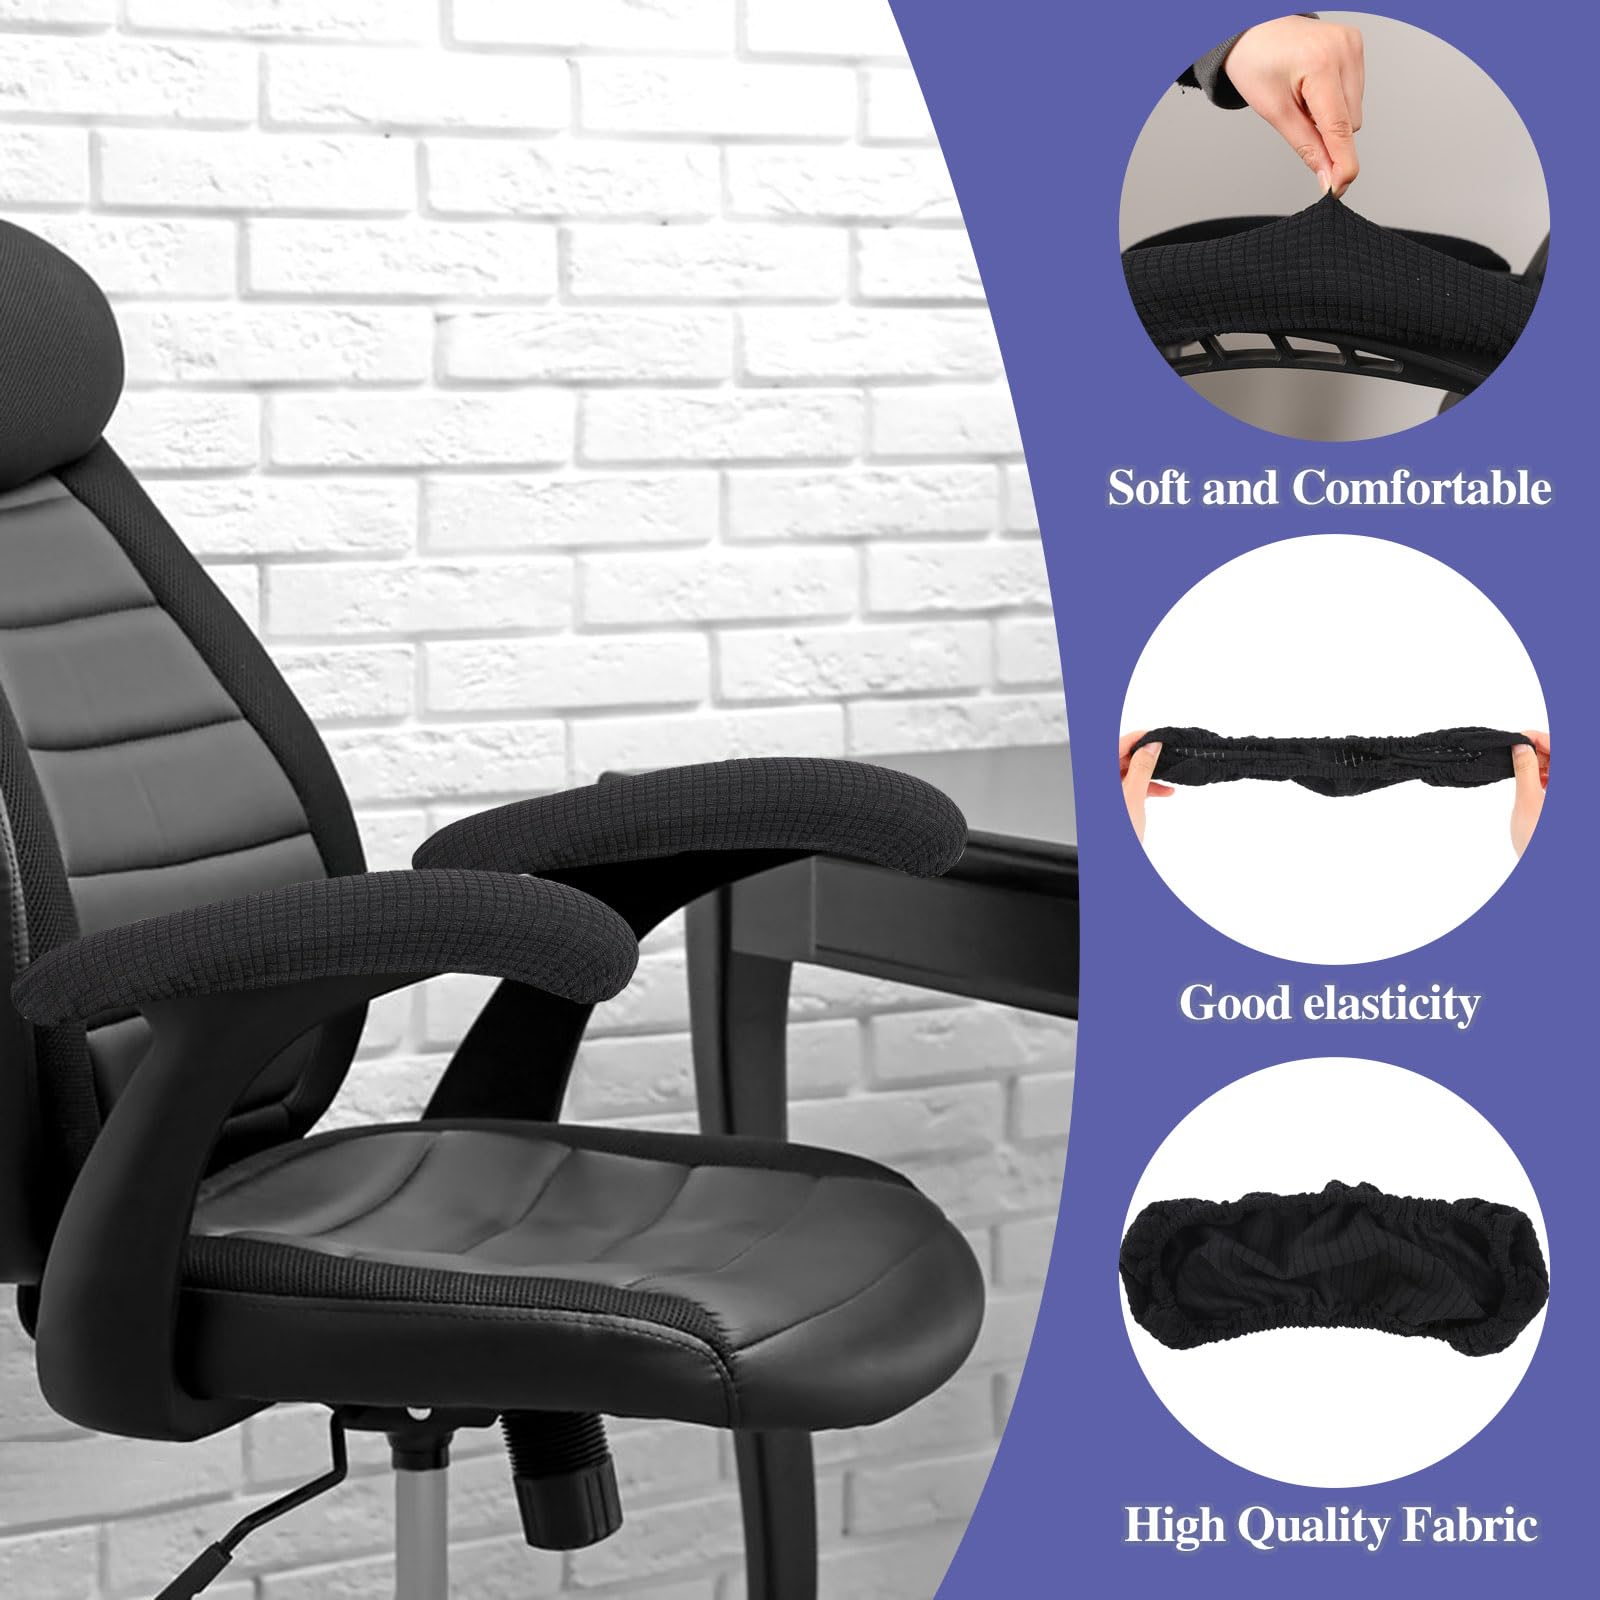 KALIONE 2Pcs Office Chair Arm Cover, Black Armrest Slipcover Pads Chair Armrest Covers, Office Seat Hand Rest Protector, Elastic Computer Arm Protectors,Arm Covers Protectors for Office Chair